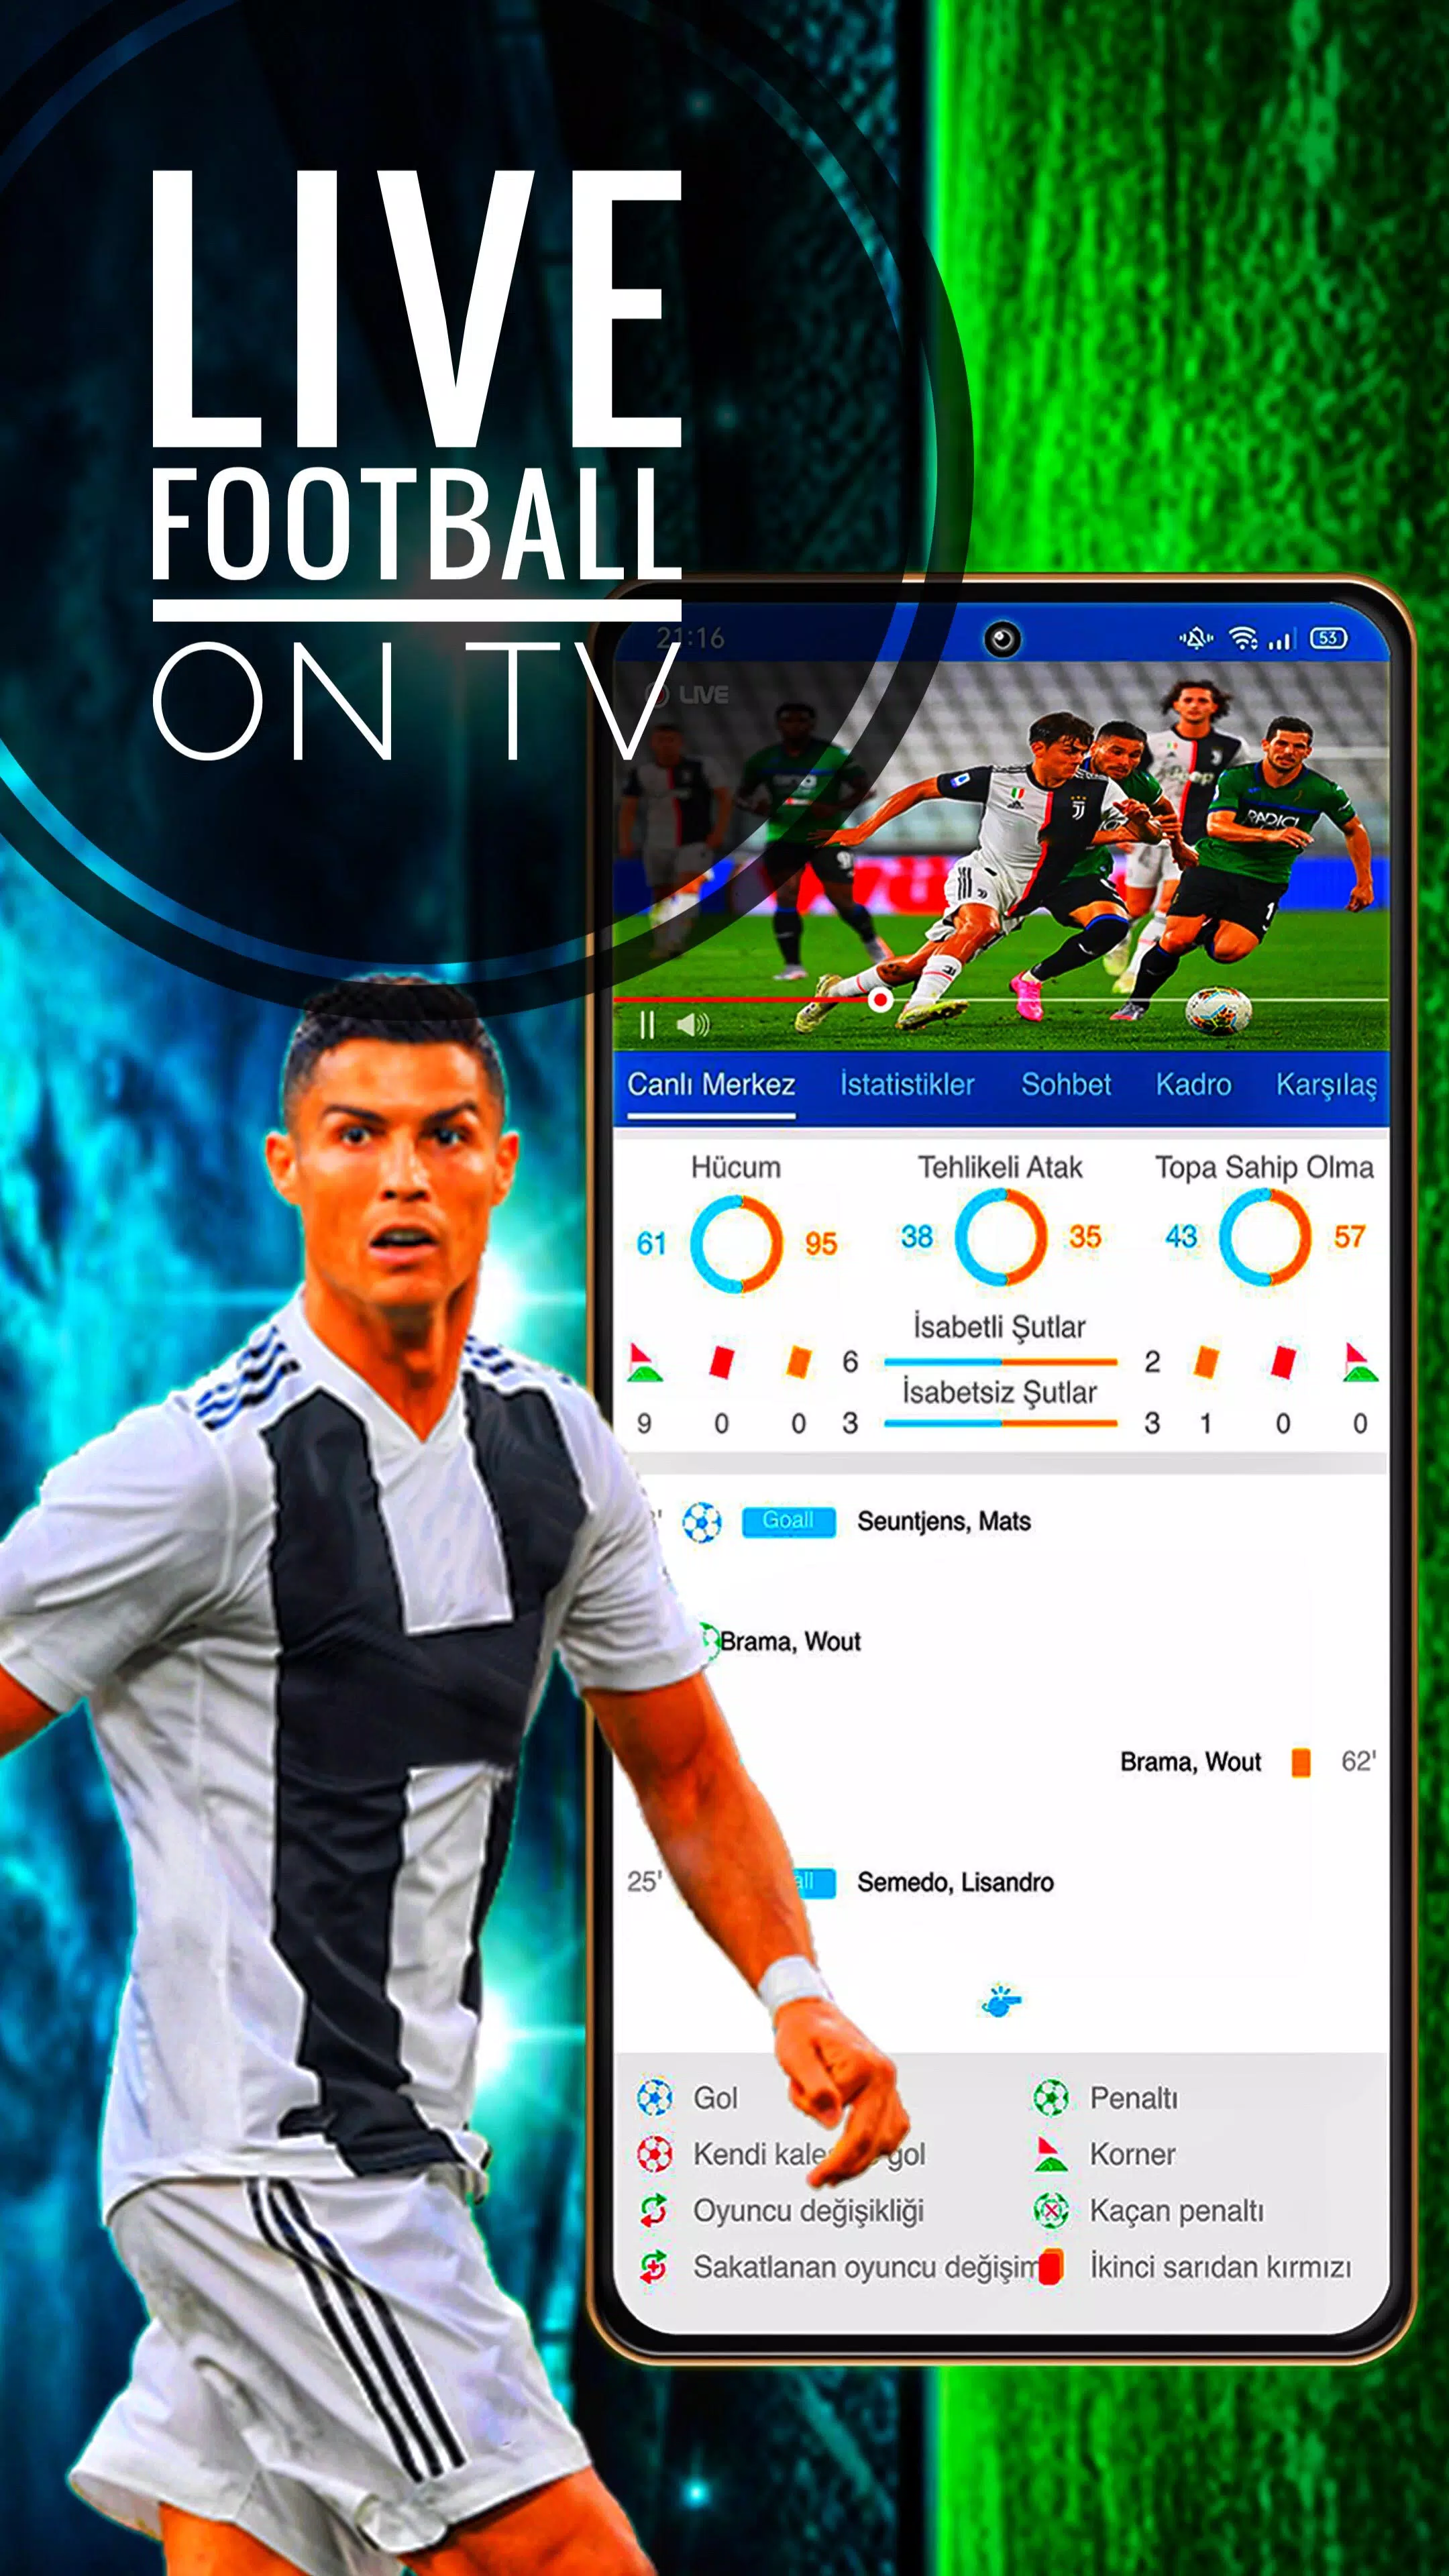 Live football TV for Android - APK Download